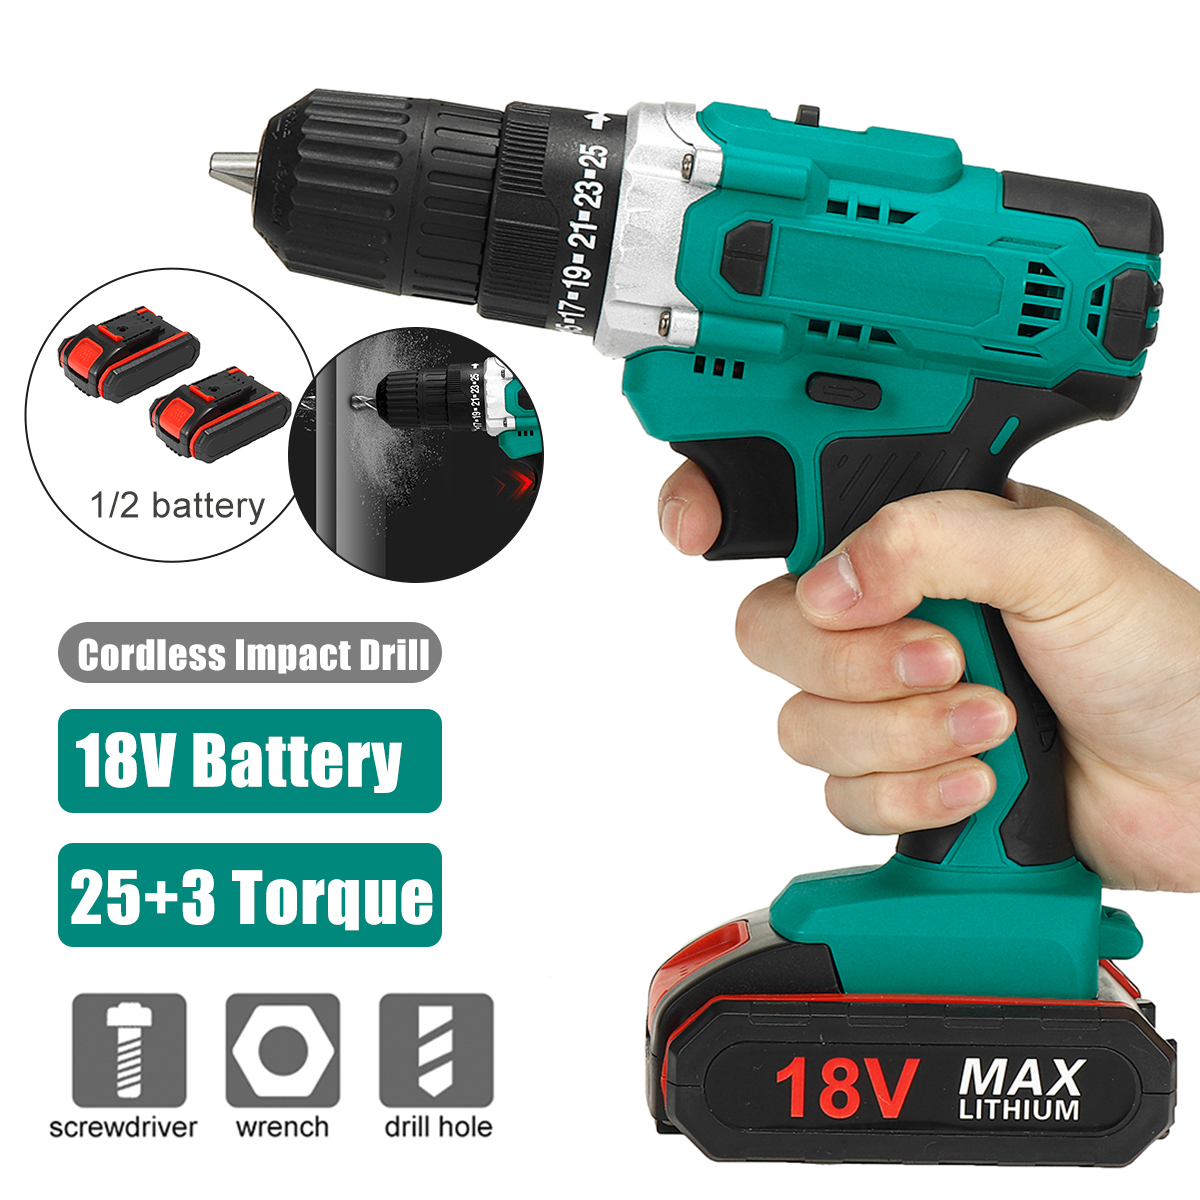 Multifunctional-3In1-Cordless-Electric-Screw-Driver-Drill-Wrench-38-Inch-Chuck-Rechargeable-Impact-D-1837415-2